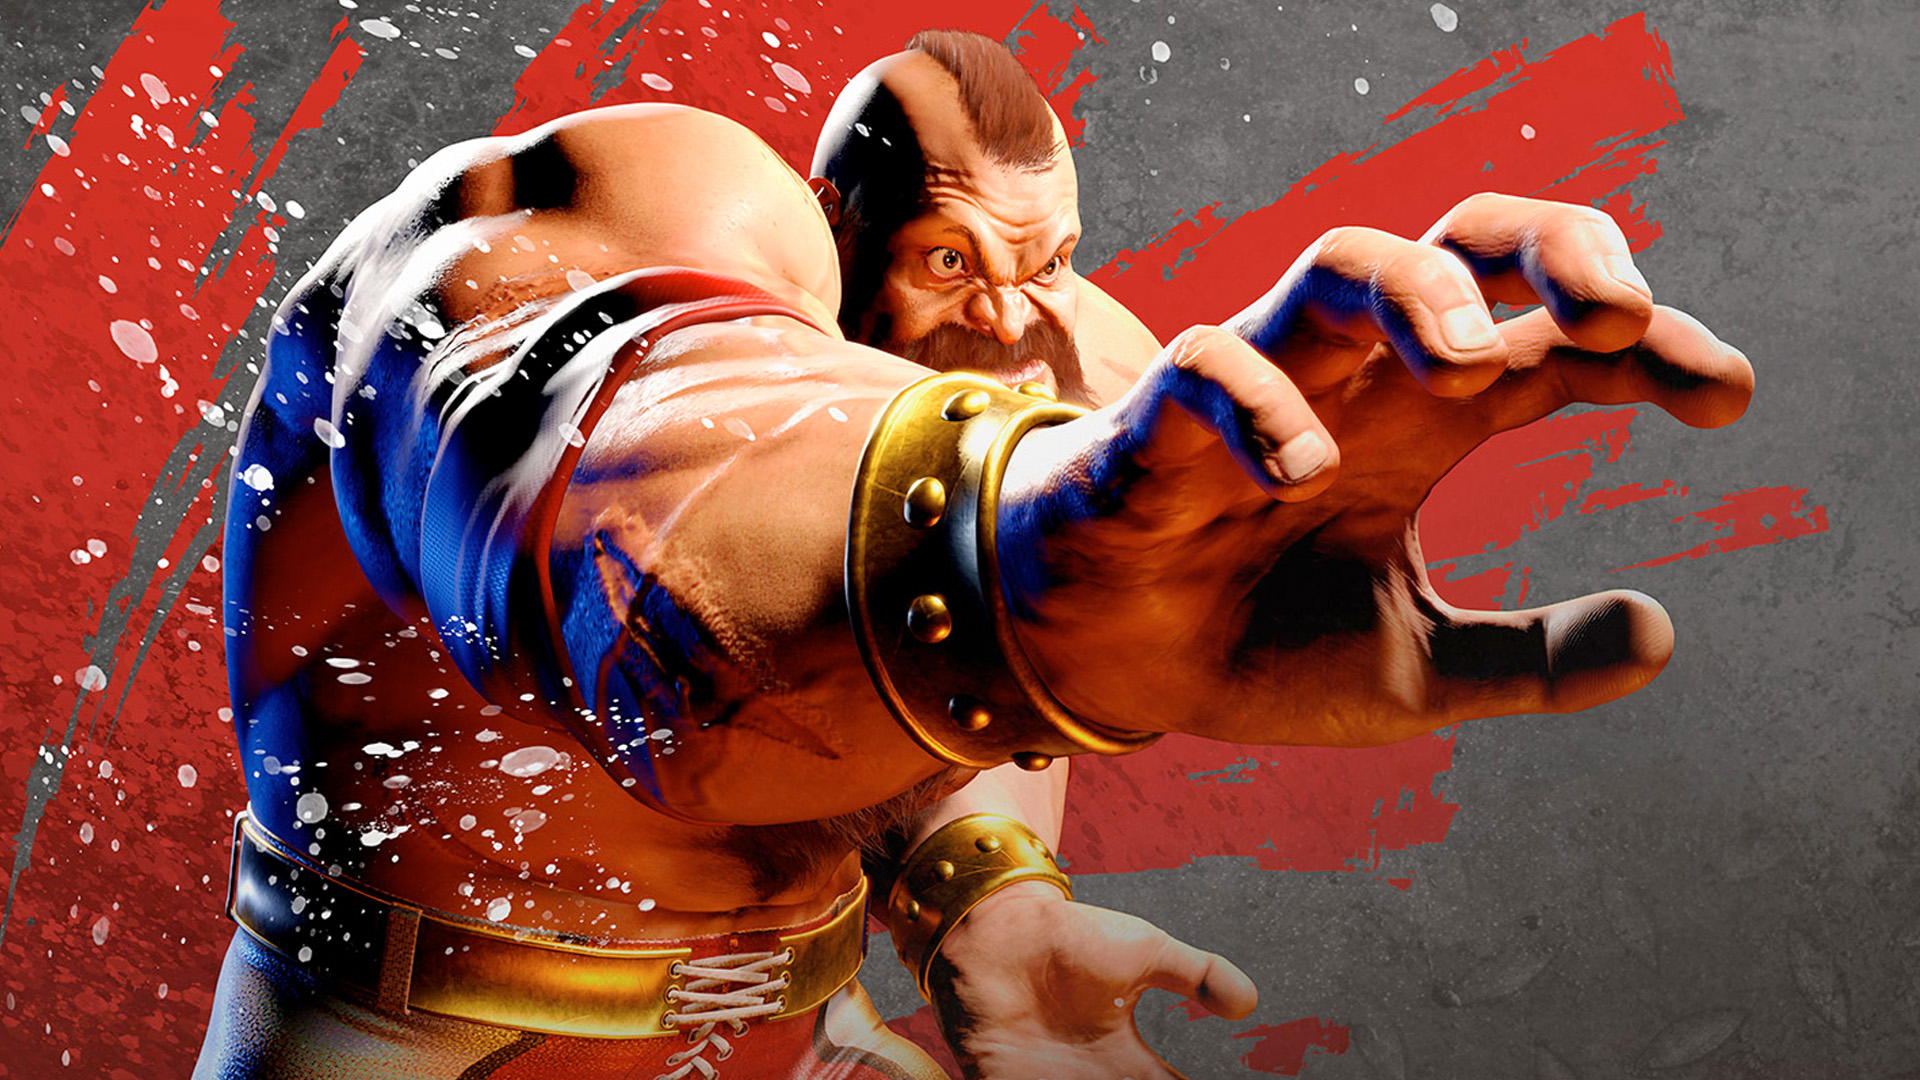 6 characters that should return in Street Fighter 6